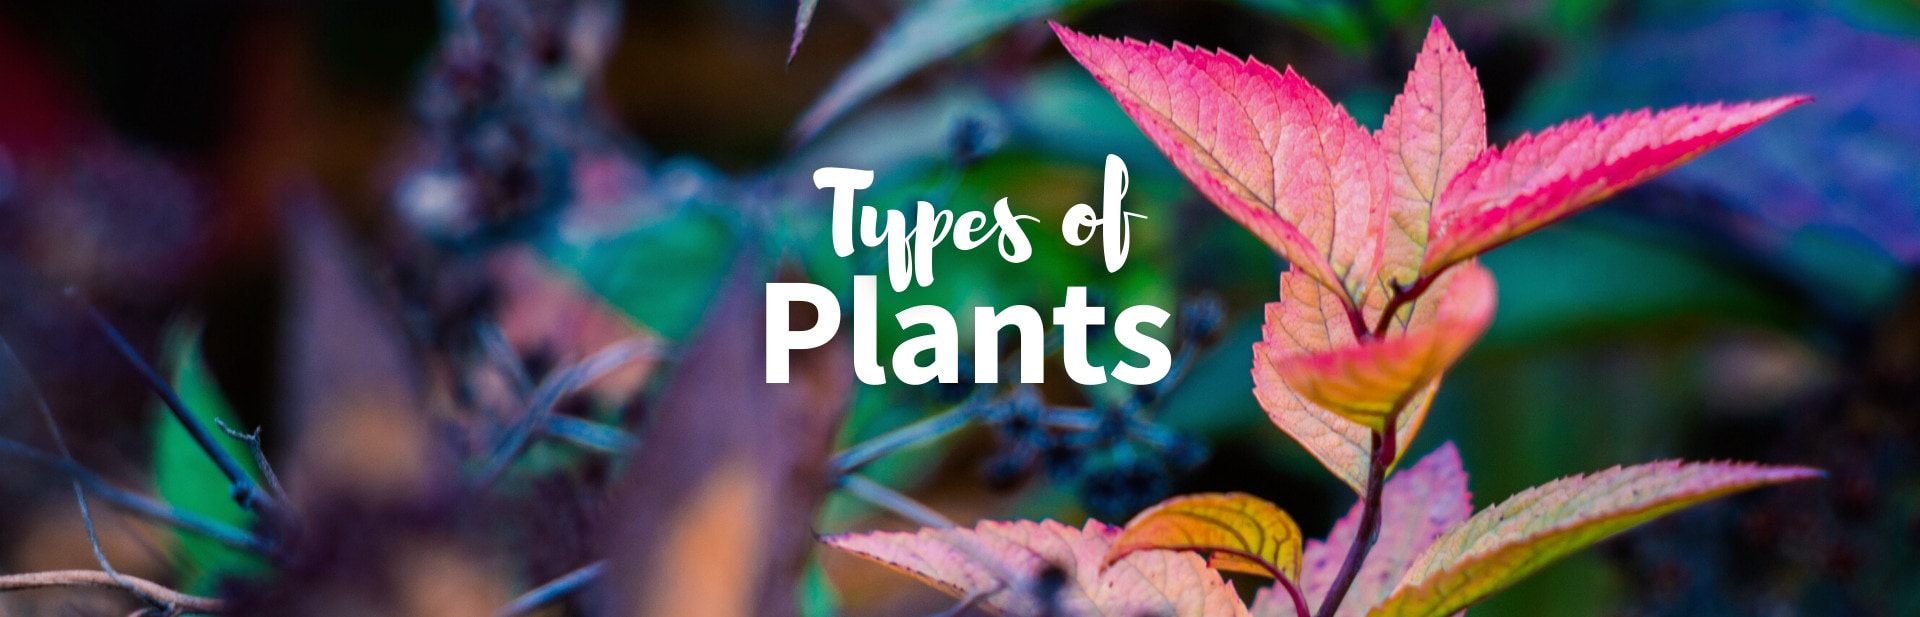 21+ Types of Plants: From the Dinosaur Age to the Present (ID Guide, Pictures, and Facts)